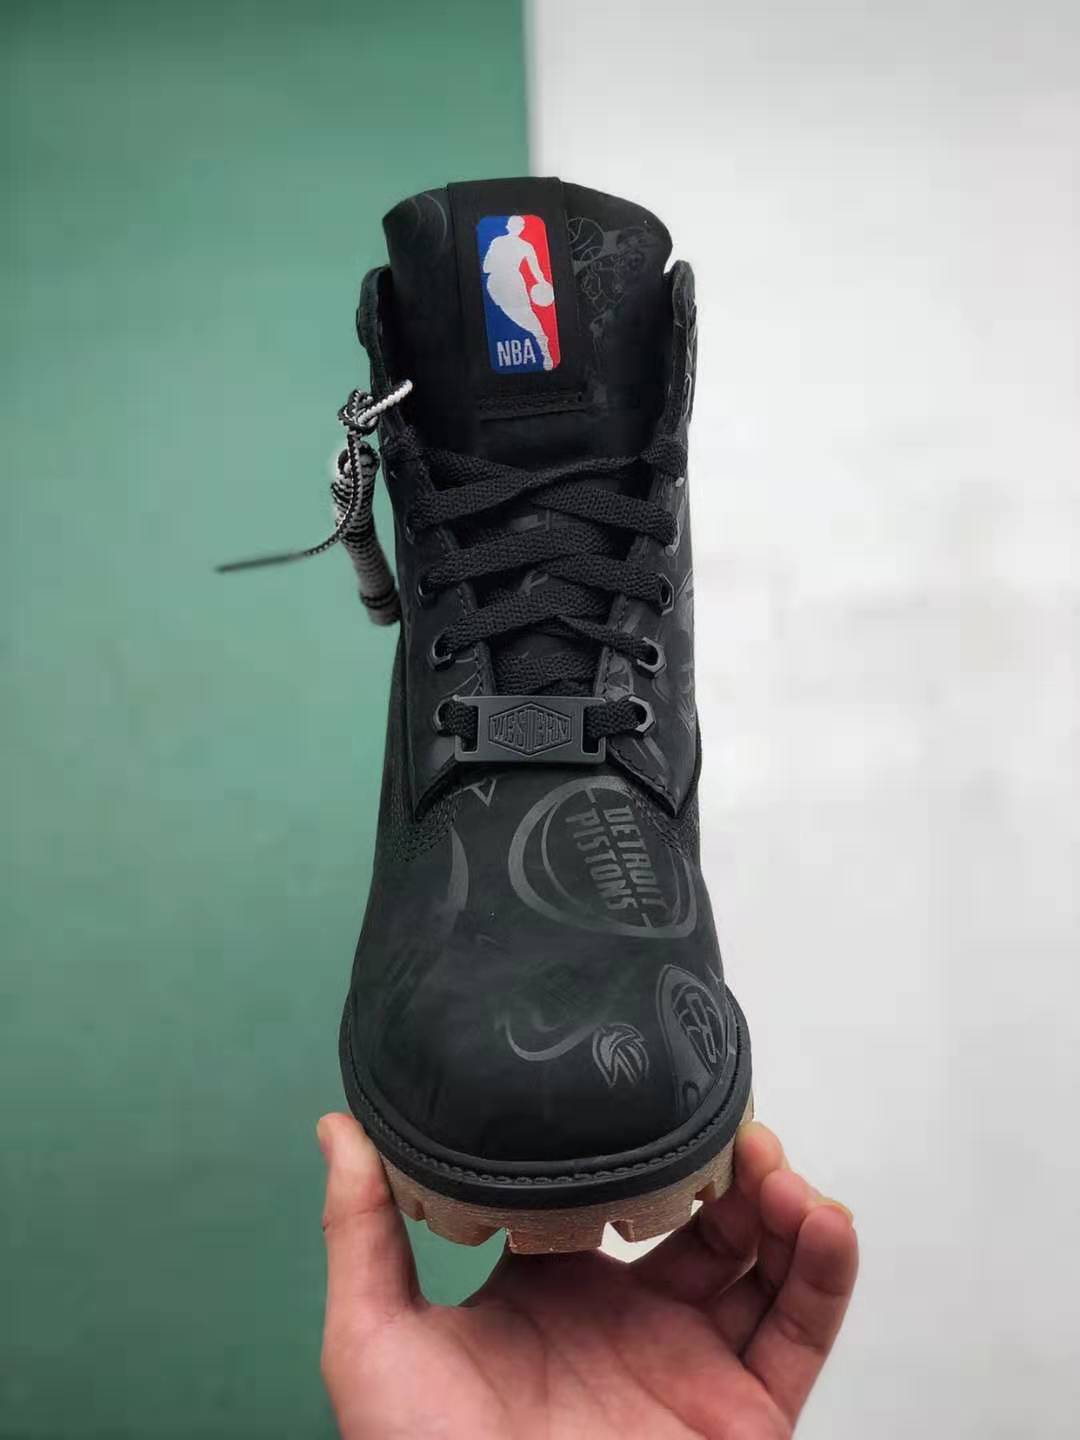 Timberland NBA x 6 Inch Premium East Vs. West TB0A24BA 001 - Limited Edition Collaboration